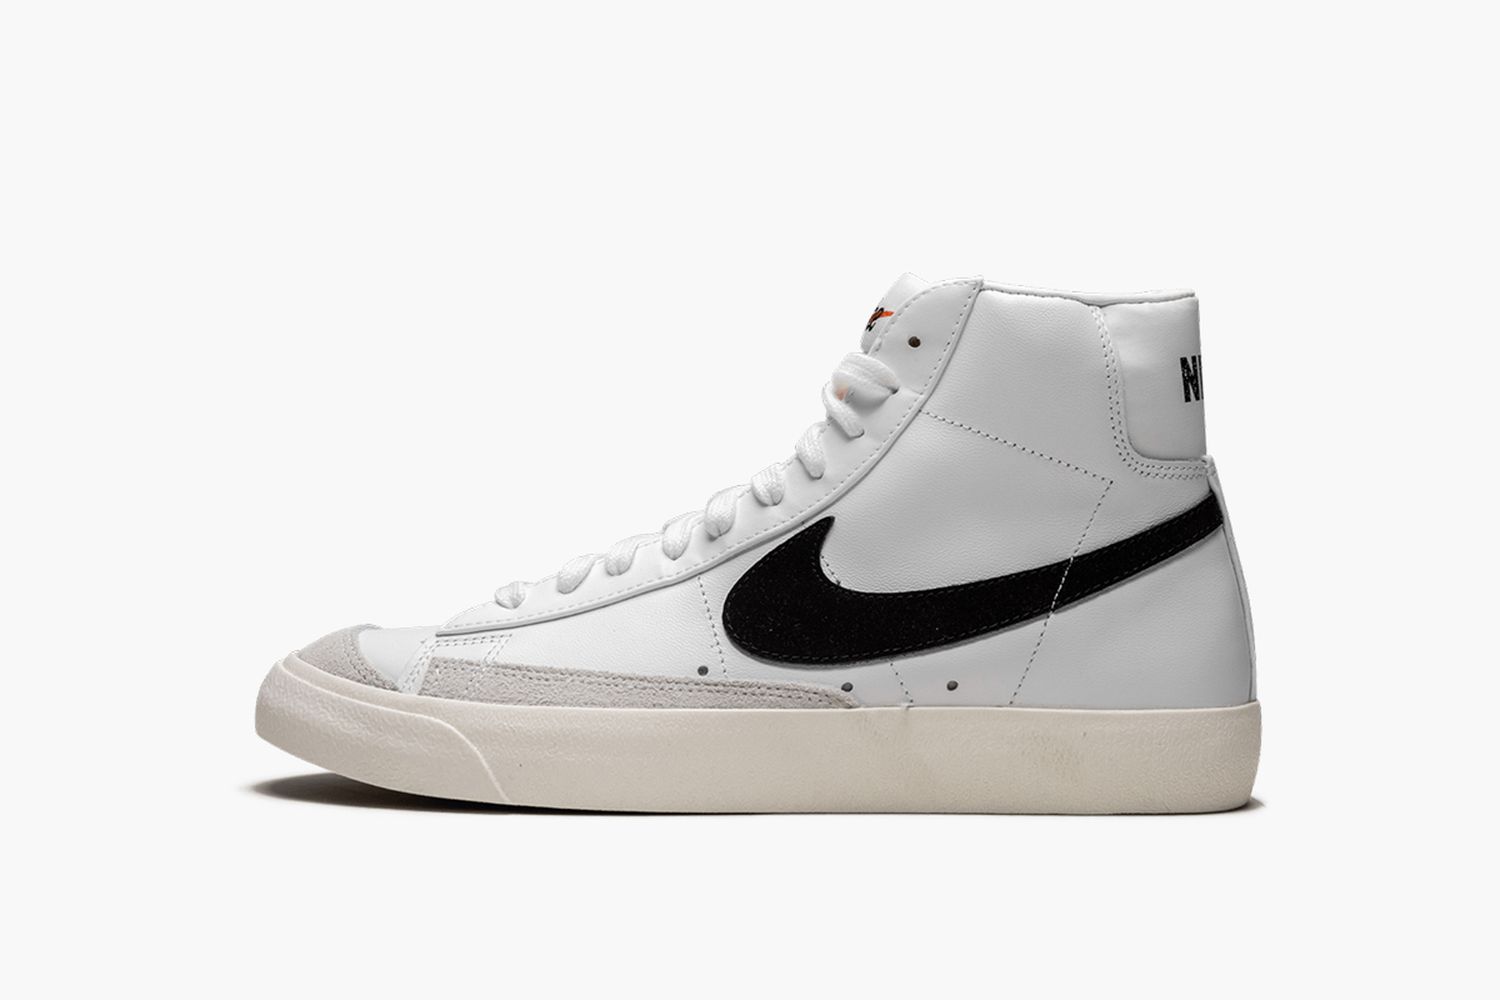 bolt Thorough Heap of Shop Our Favorite Nike Blazer Sneakers Here